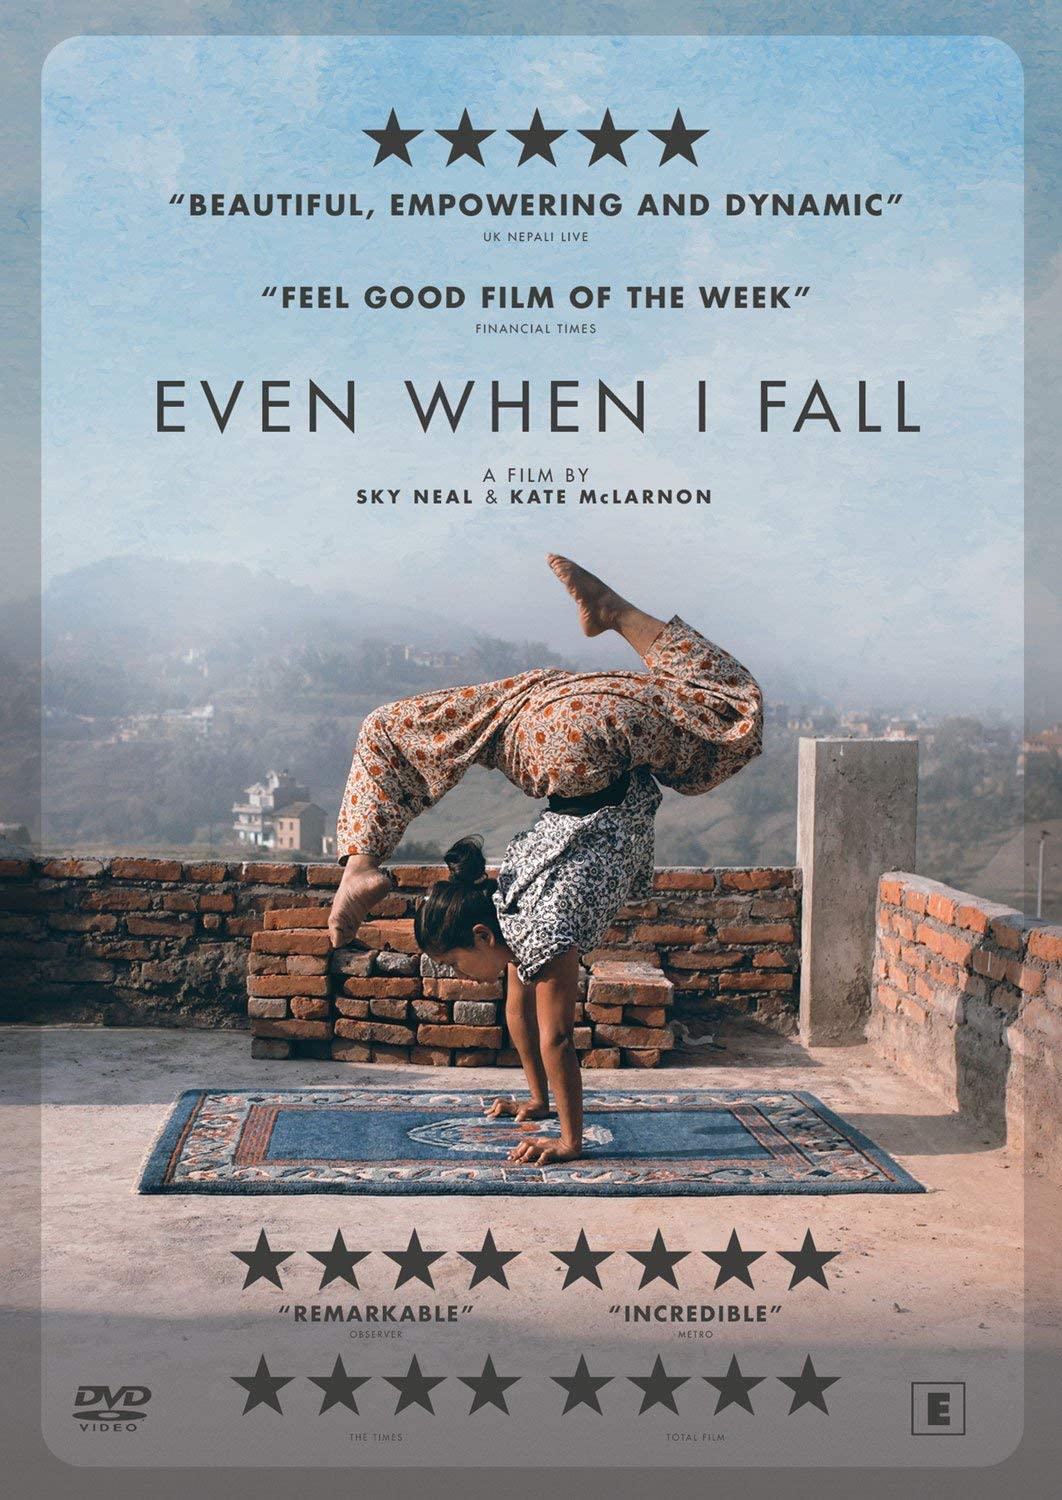 Even when I fall - Documentary [DVD]